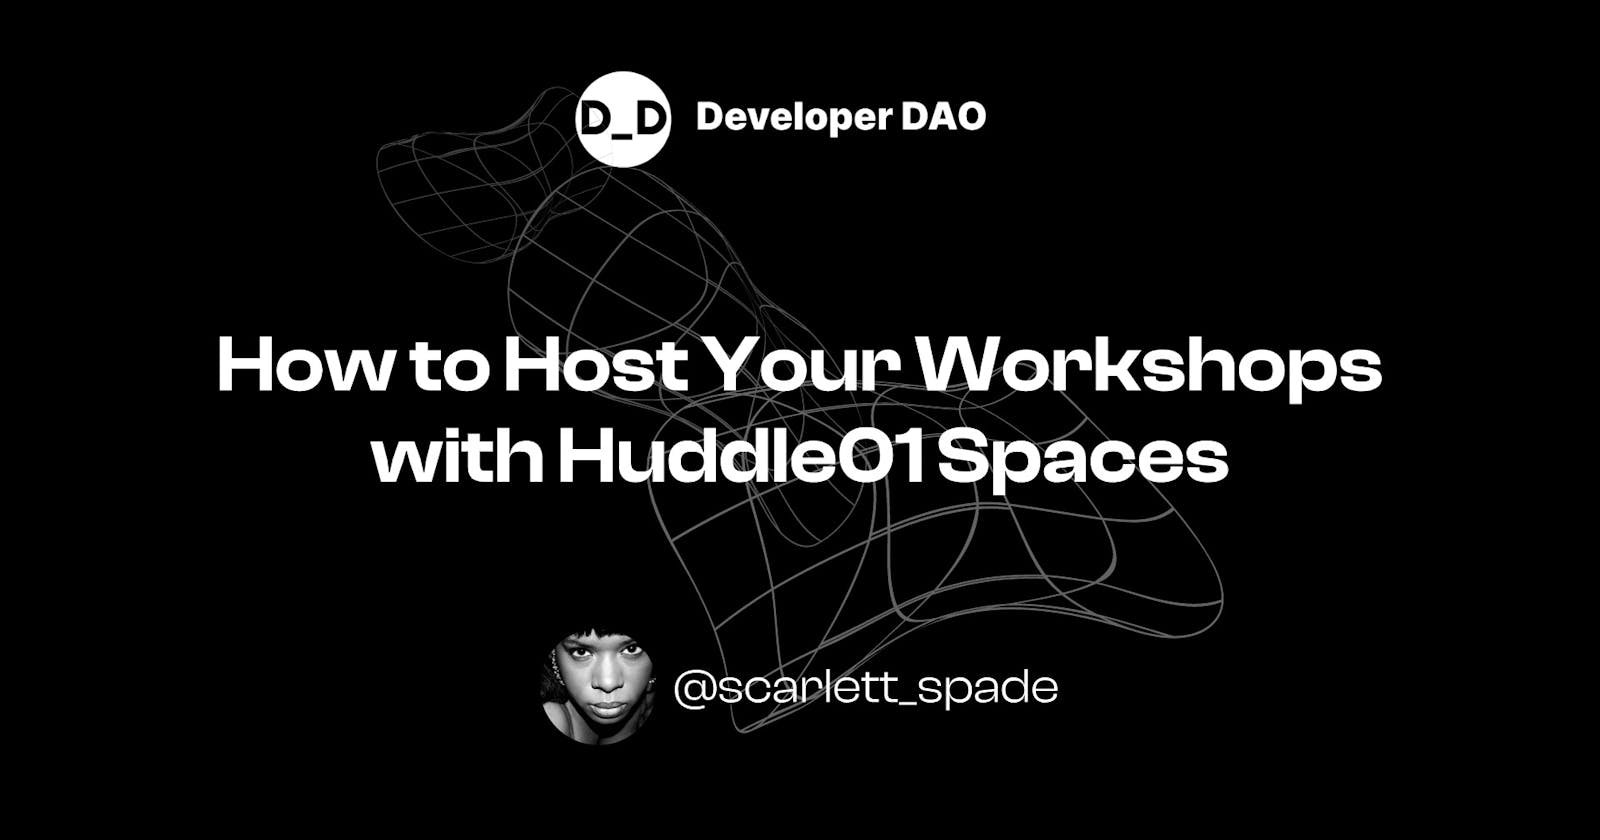 How to Host Your Workshops with Huddle01 Spaces